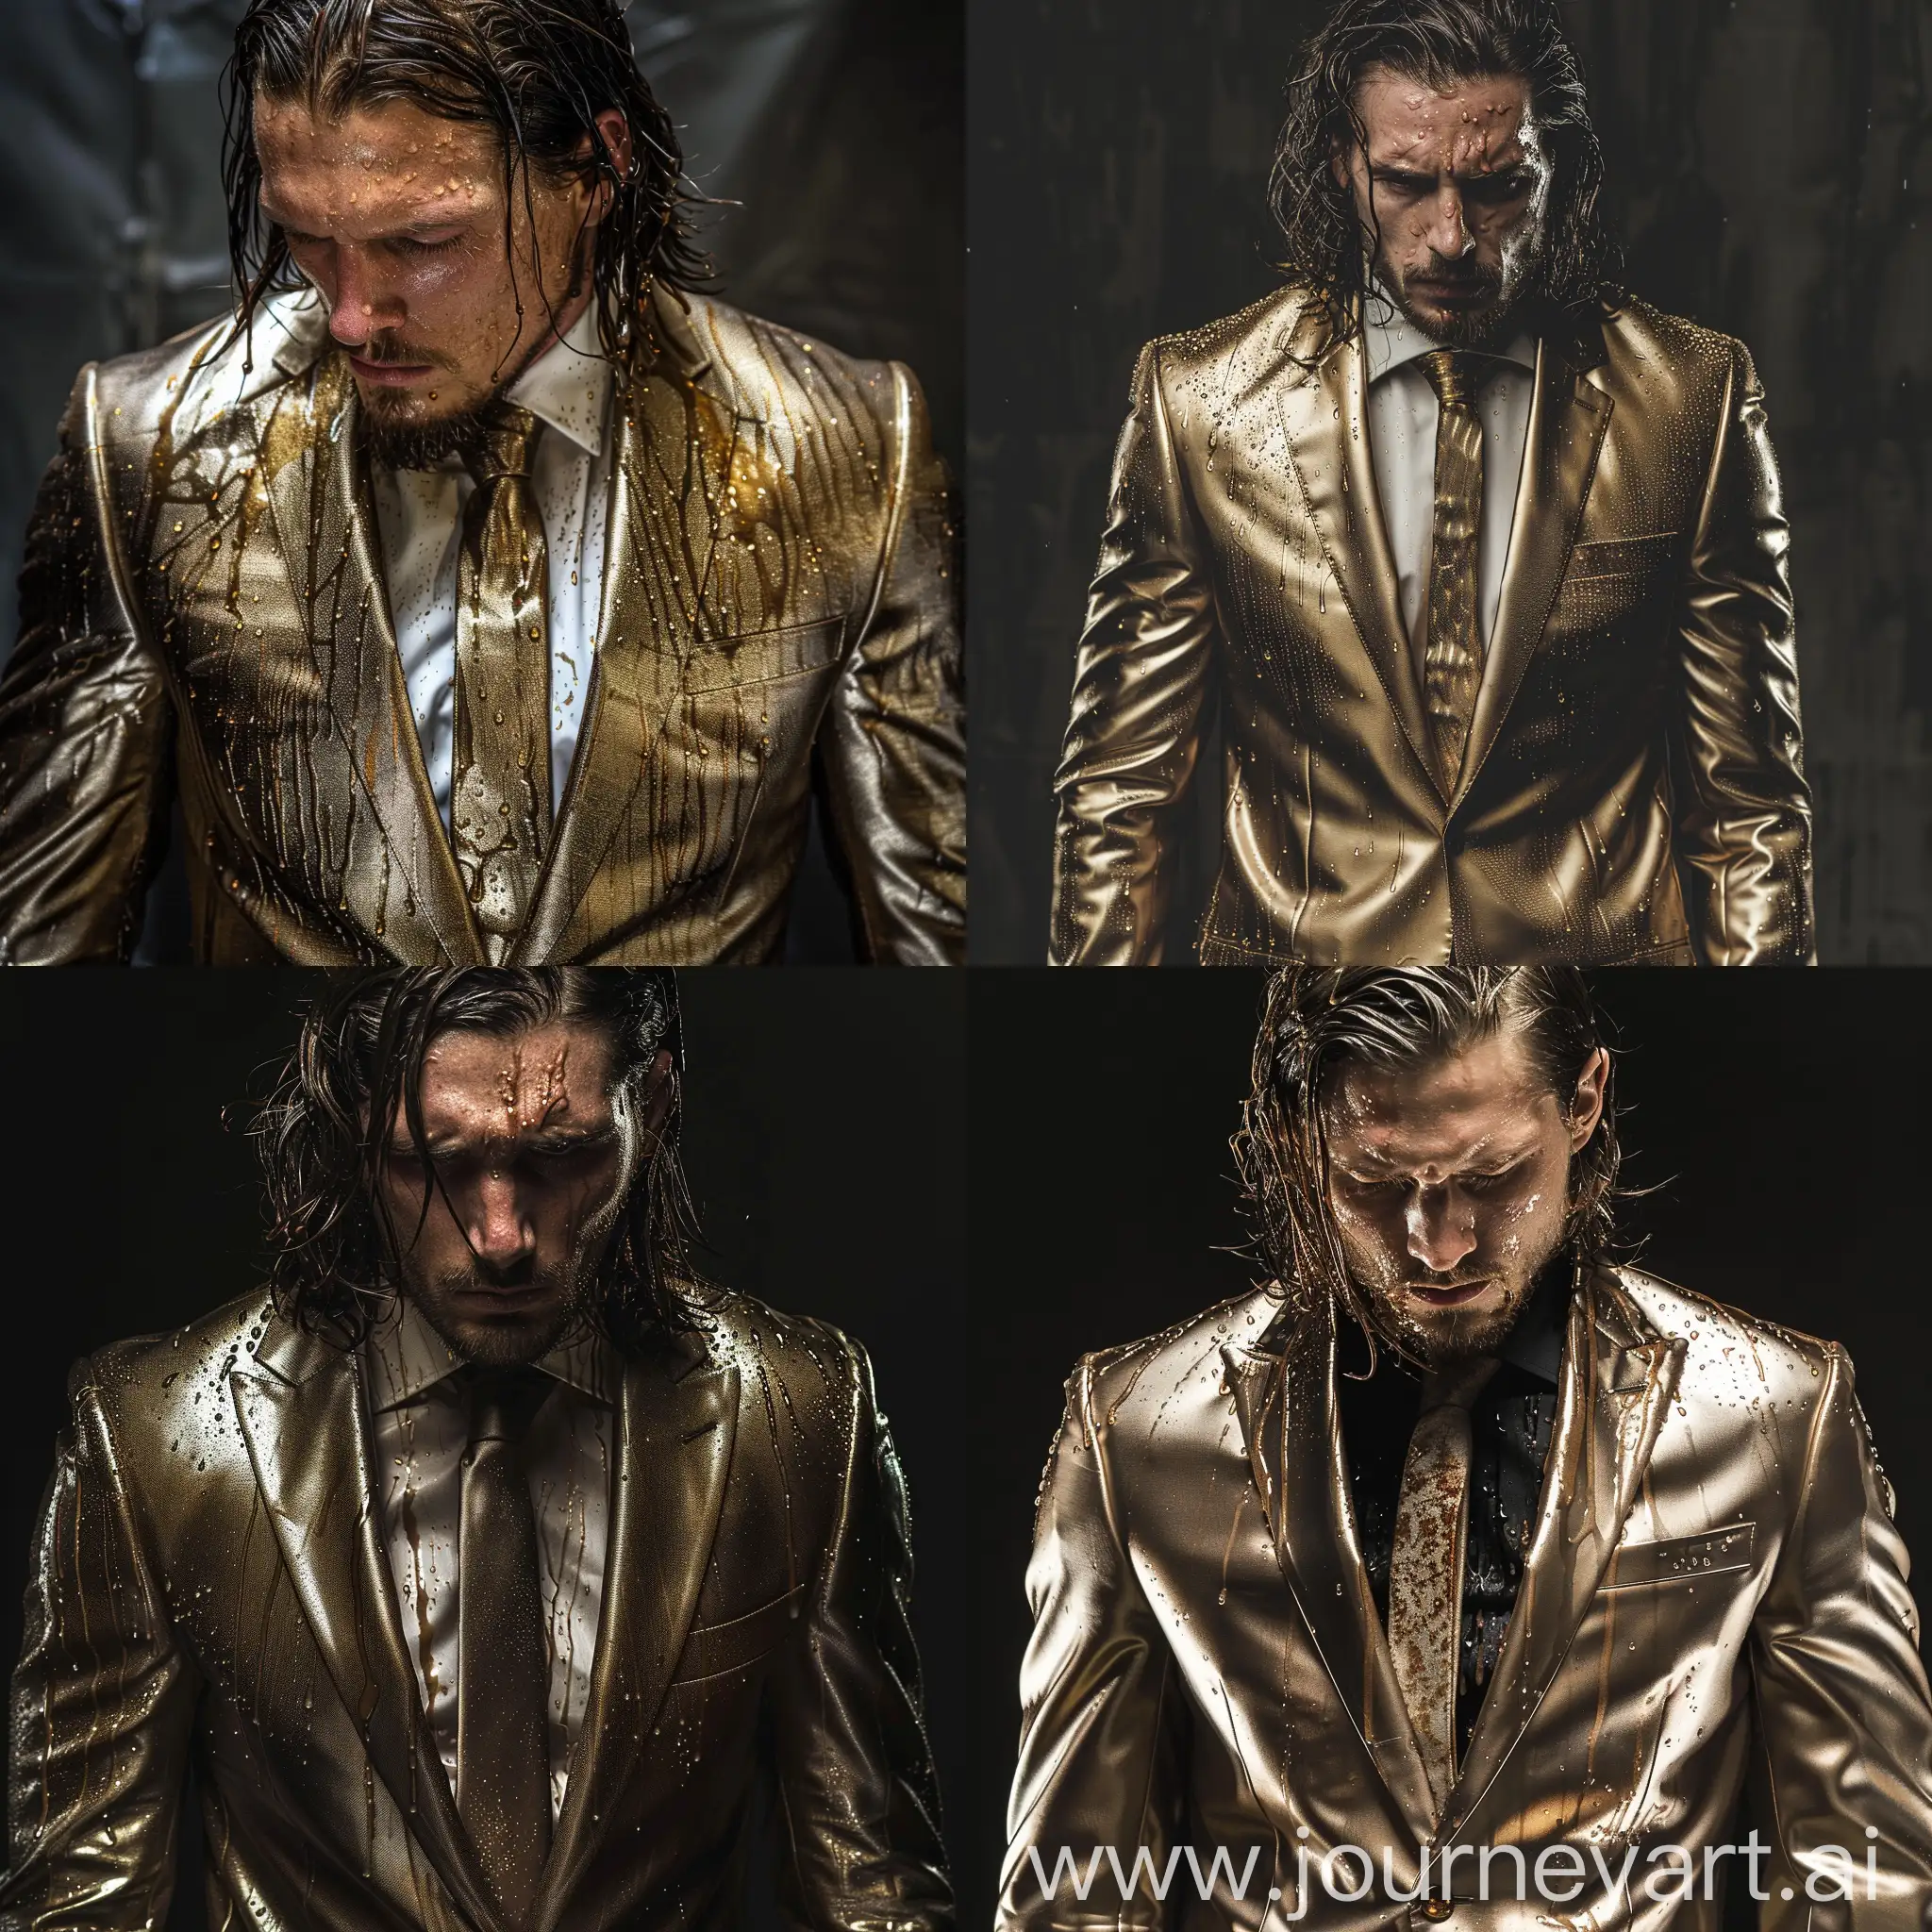 thirty year old, handsome and masculine, muscular, stubble, long length greasy hair, extremely sweaty, british conservative male wearing a very tight fitting metallic gold suit and tie, face covered in sweat